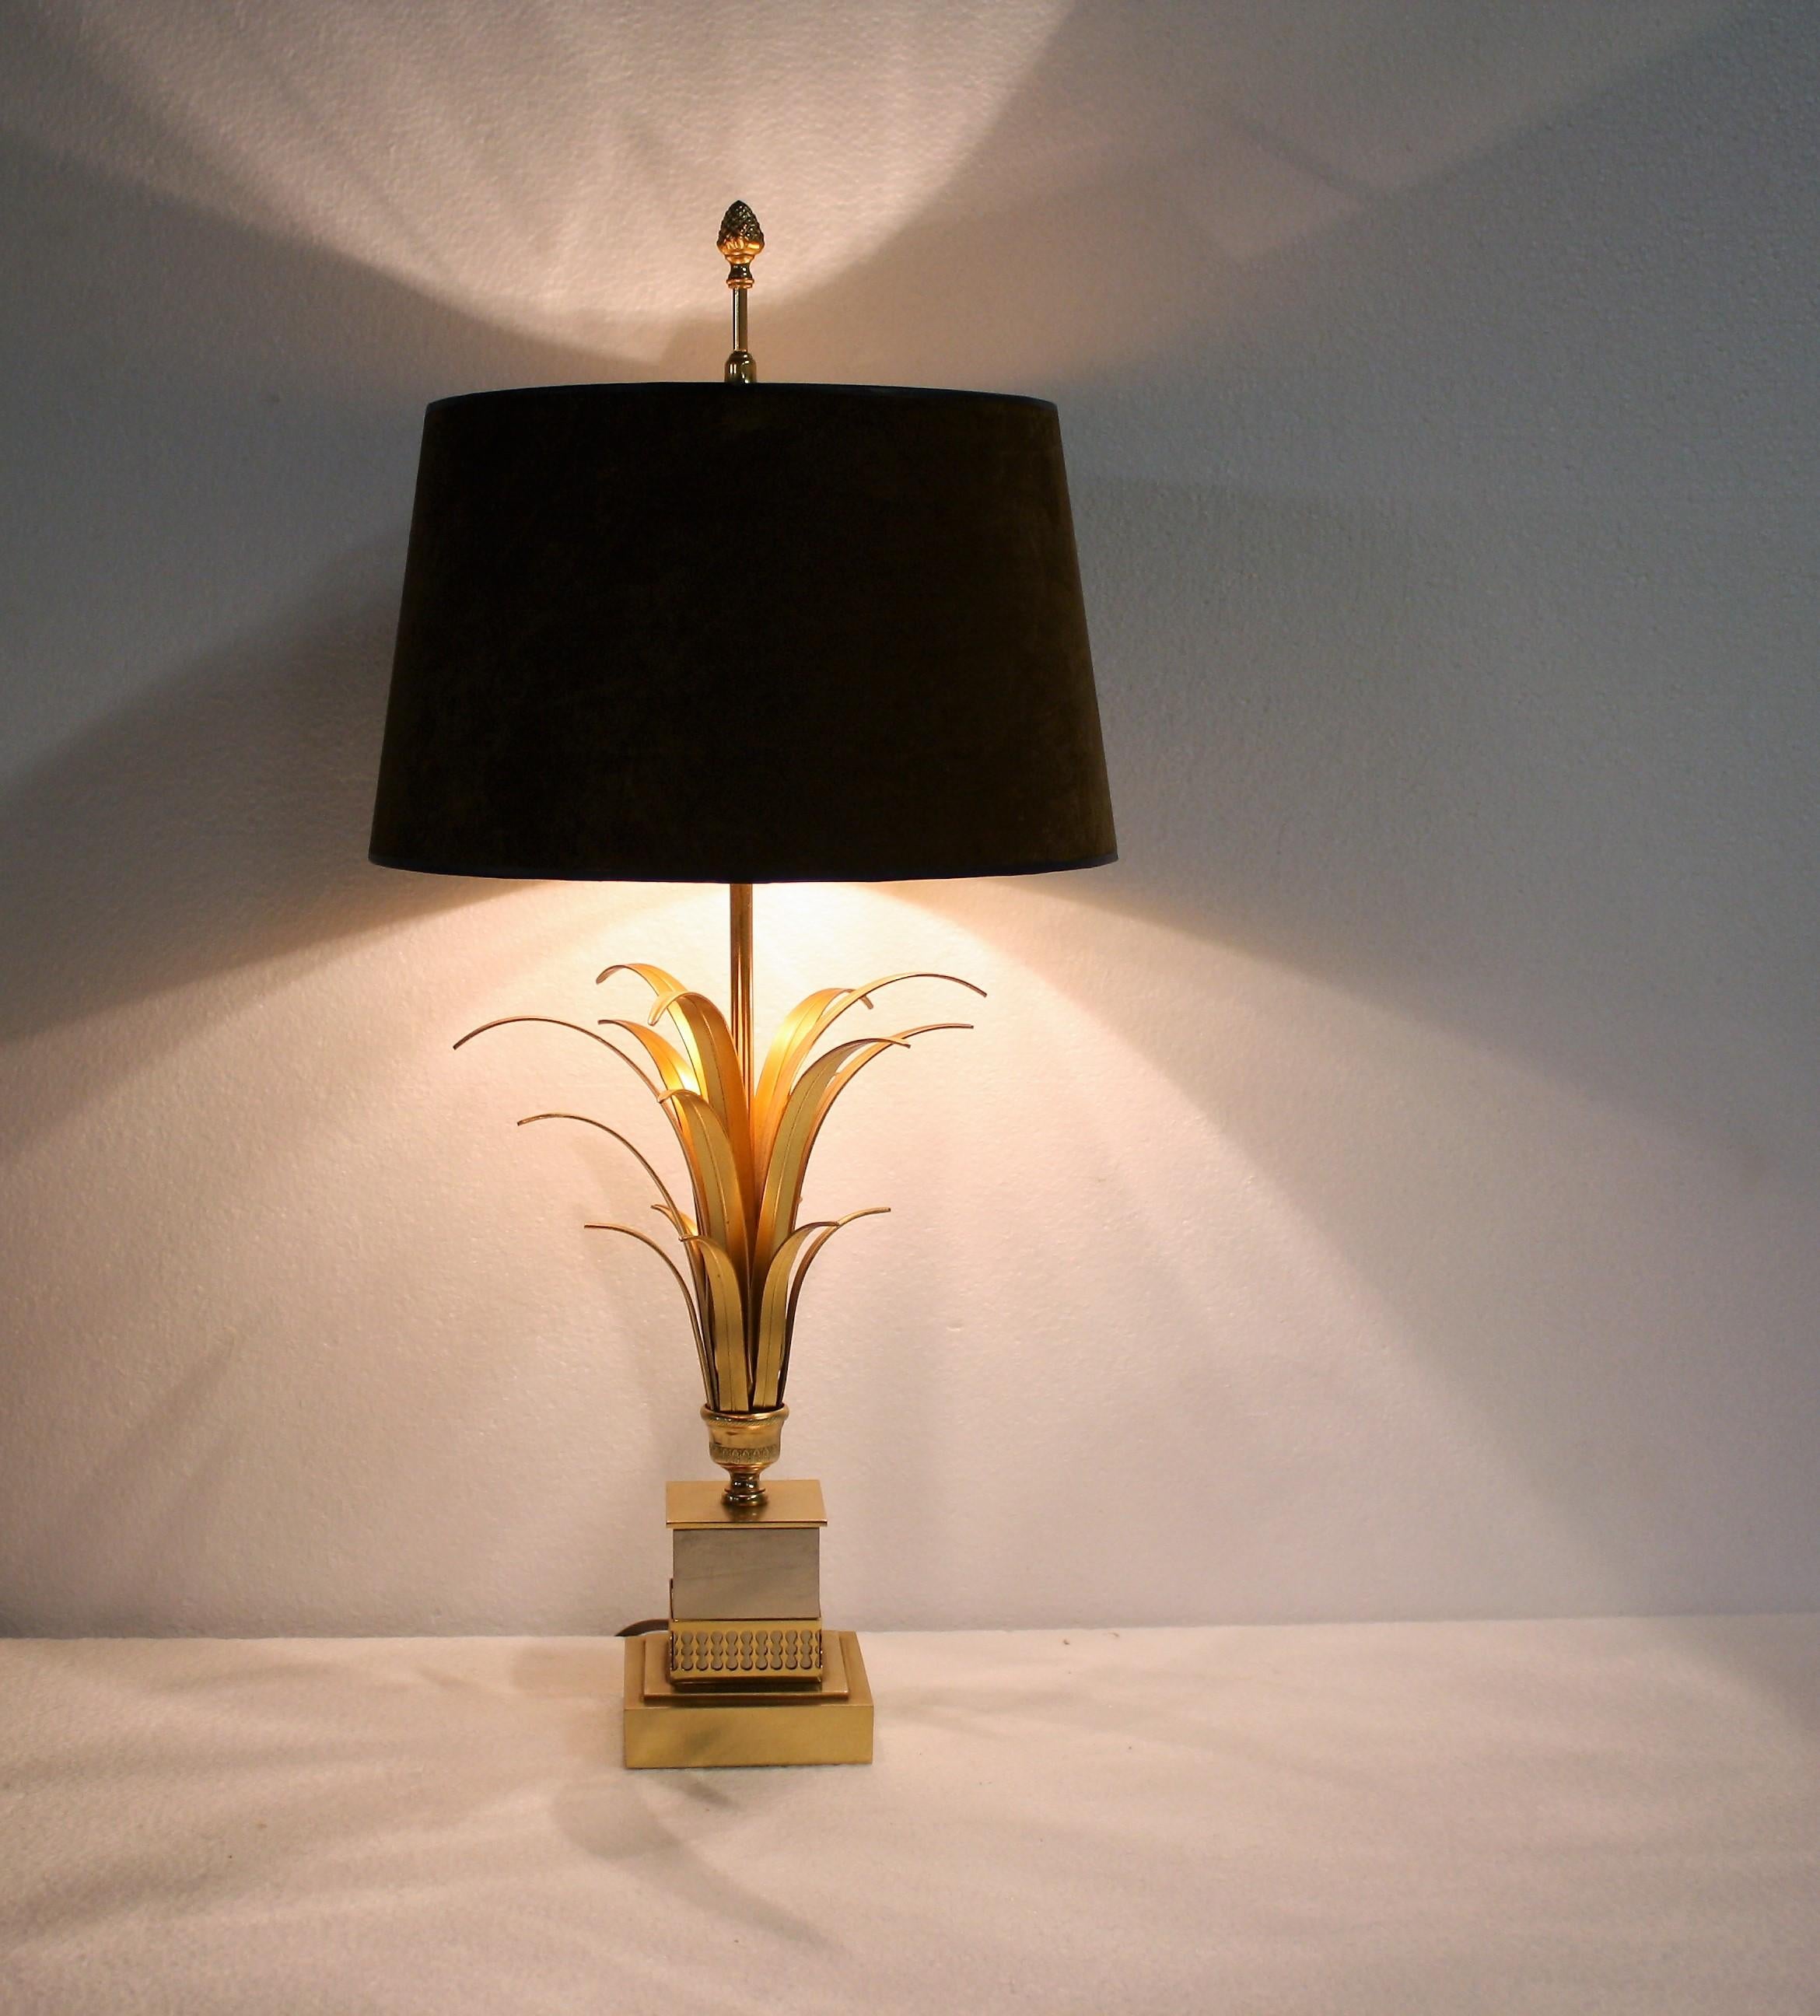 Patinated brass pineapple leaf table lamp by Boulanger attributed to Maison Charles.

This Regency style lamp is also known as 'lampe vase' and is an attractive design from the 1970s.

The three lightpoint lamp is made from chrome and brass